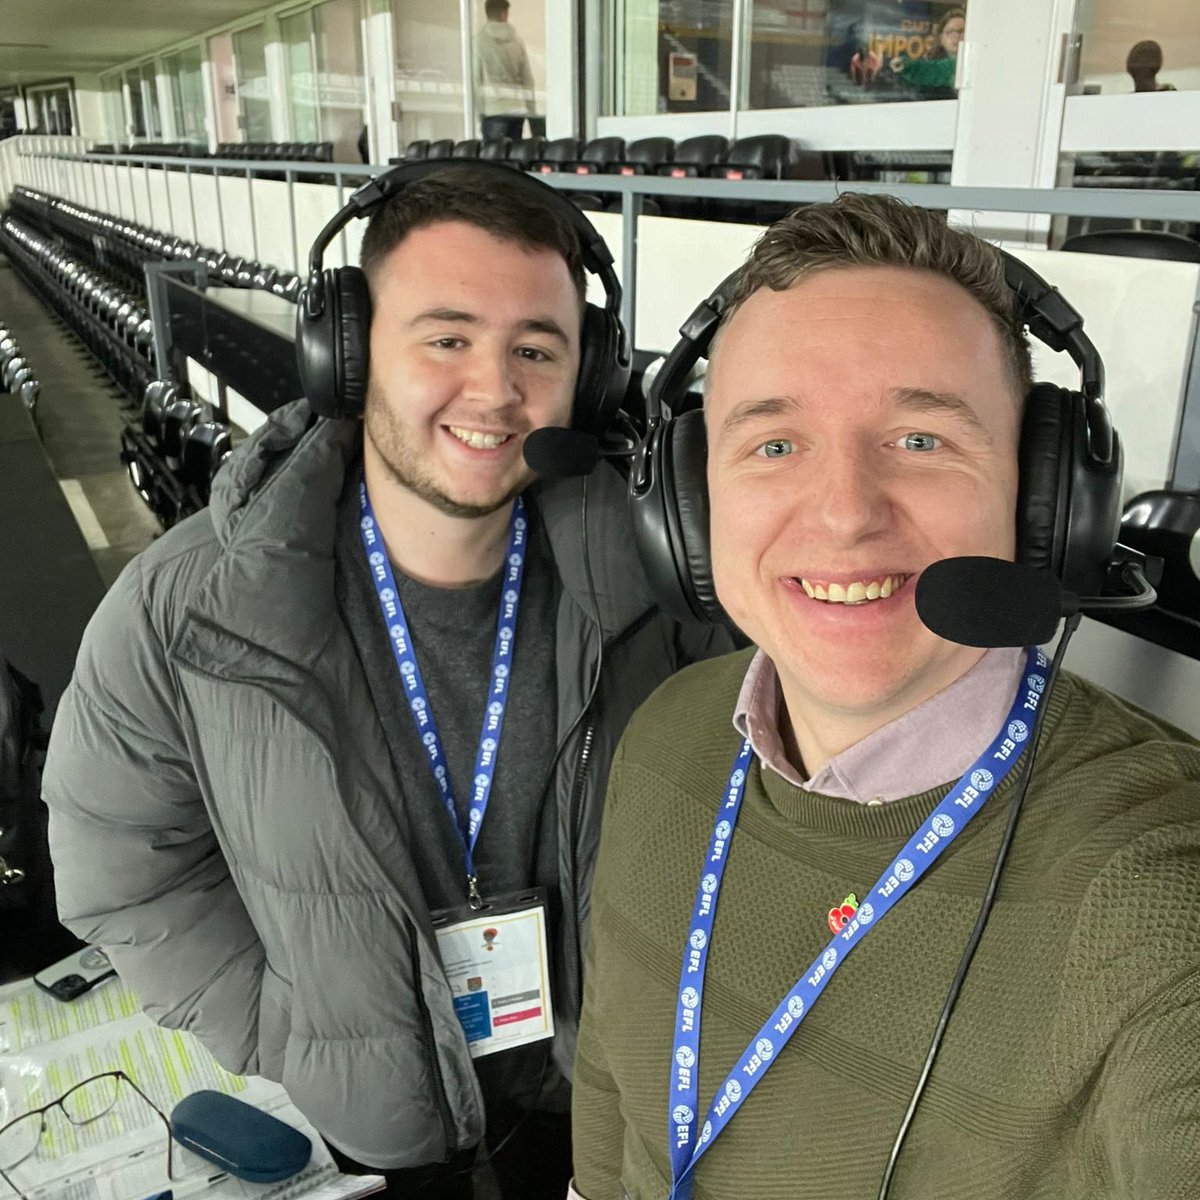 2023/24 over and out 🫡

Thankyou to everyone tuned in to any of our 2⃣5⃣ #AudioDescription commentaries this season

We hope it's enhanced your matchday experience, and if you have any feedback, drop us a DM or email info@alanmarchsport.com 📩

#DCFC #DCFCfans